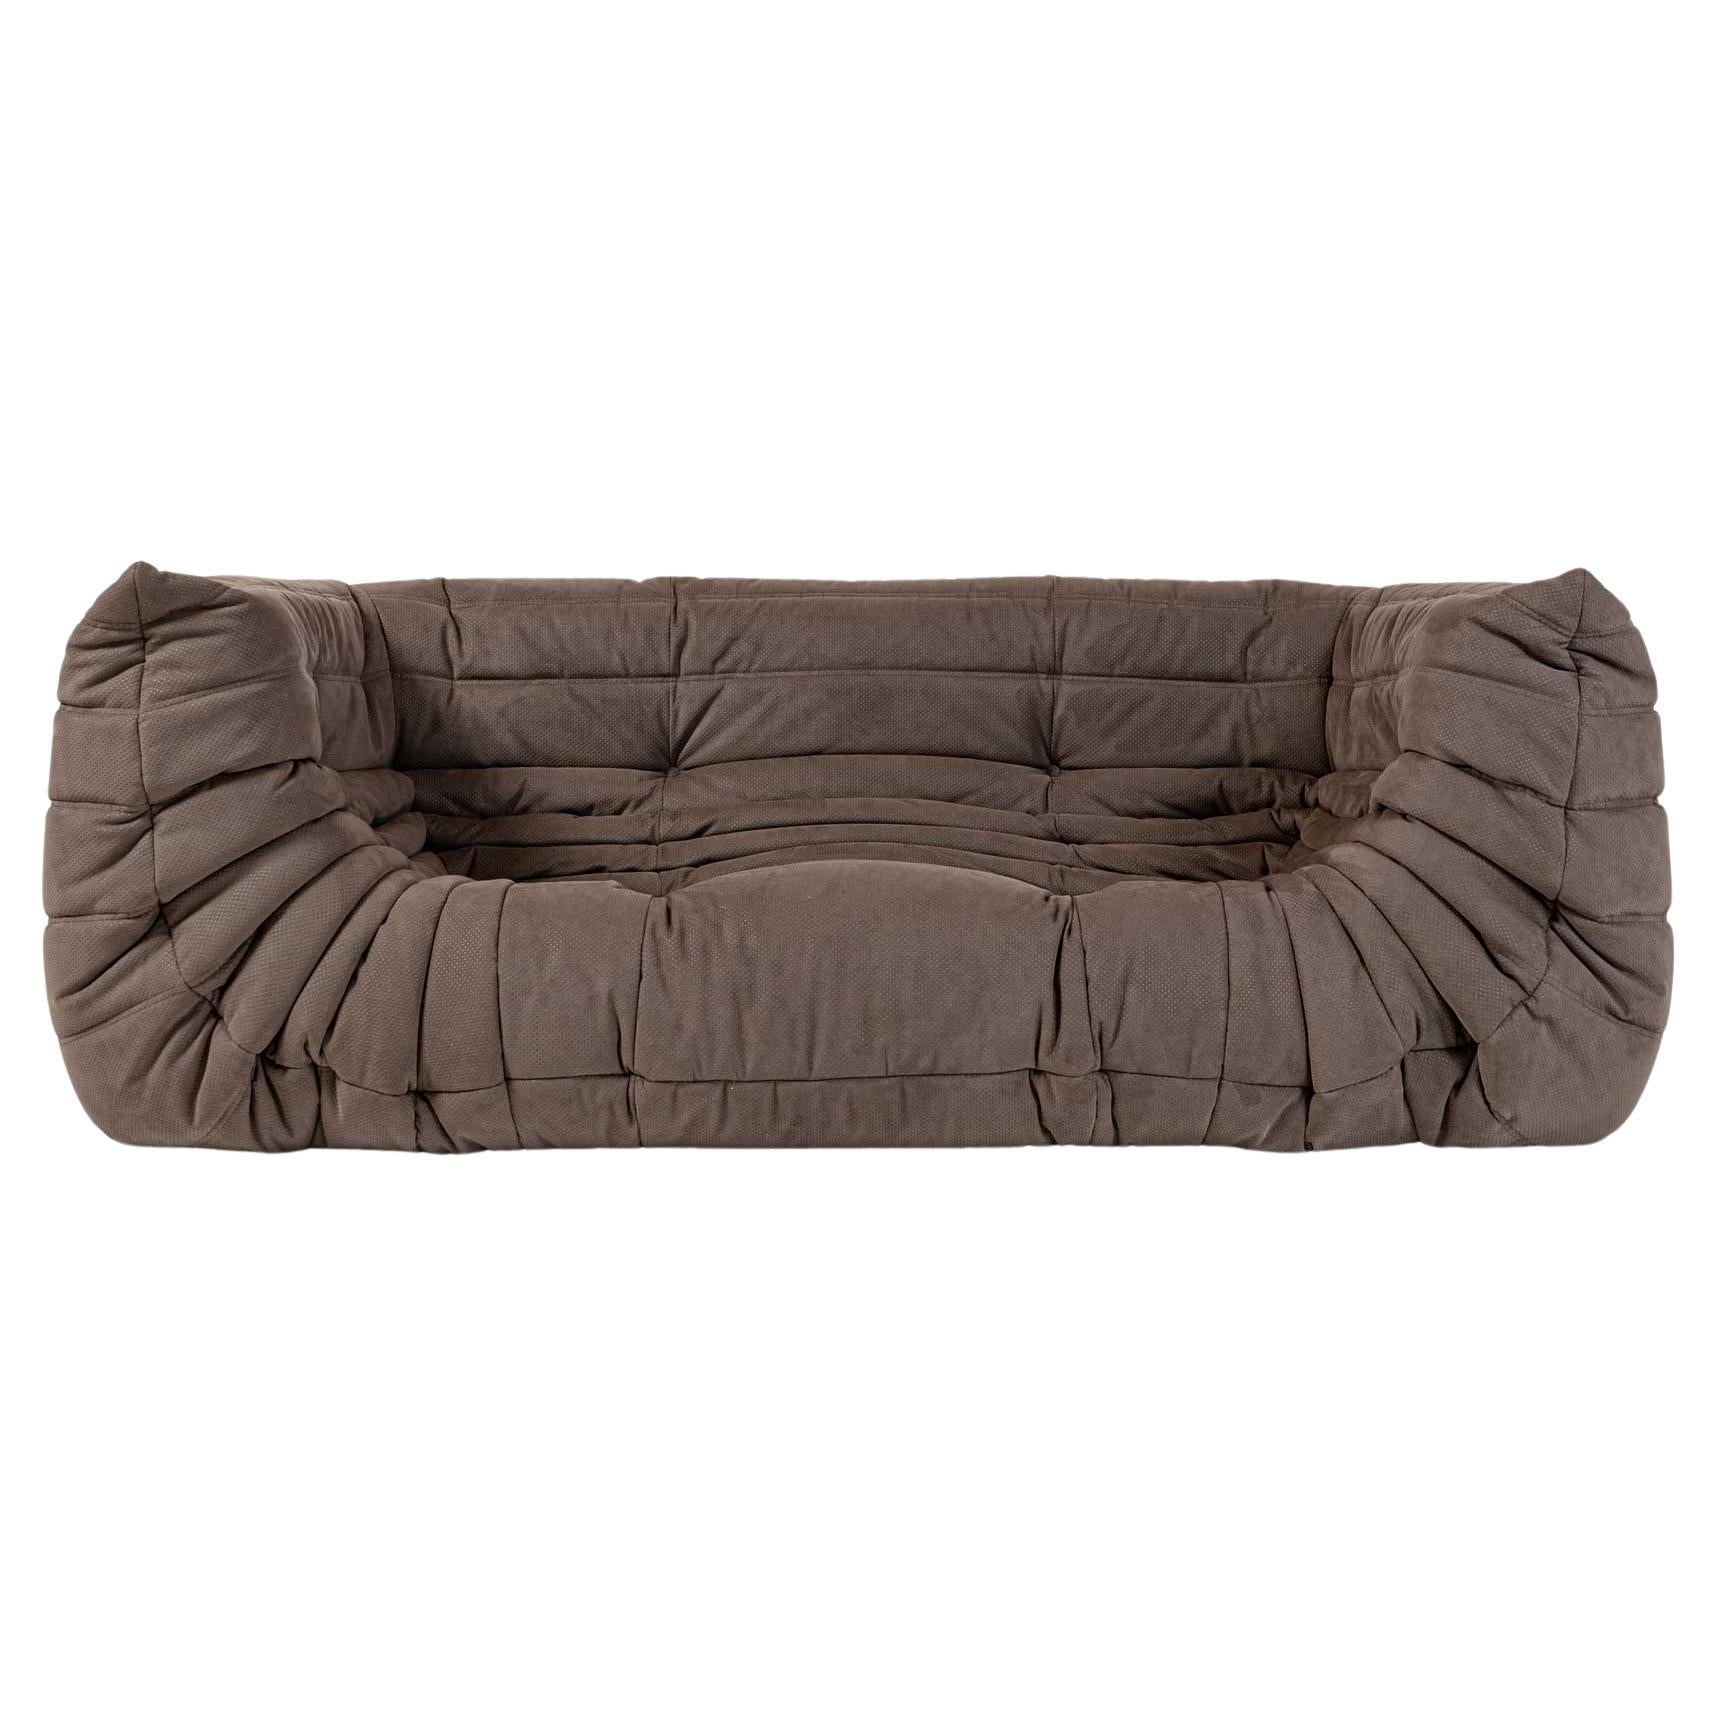 Michel Ducaroy's Togo Sofa with Arms in Brown Perforated Alcantara